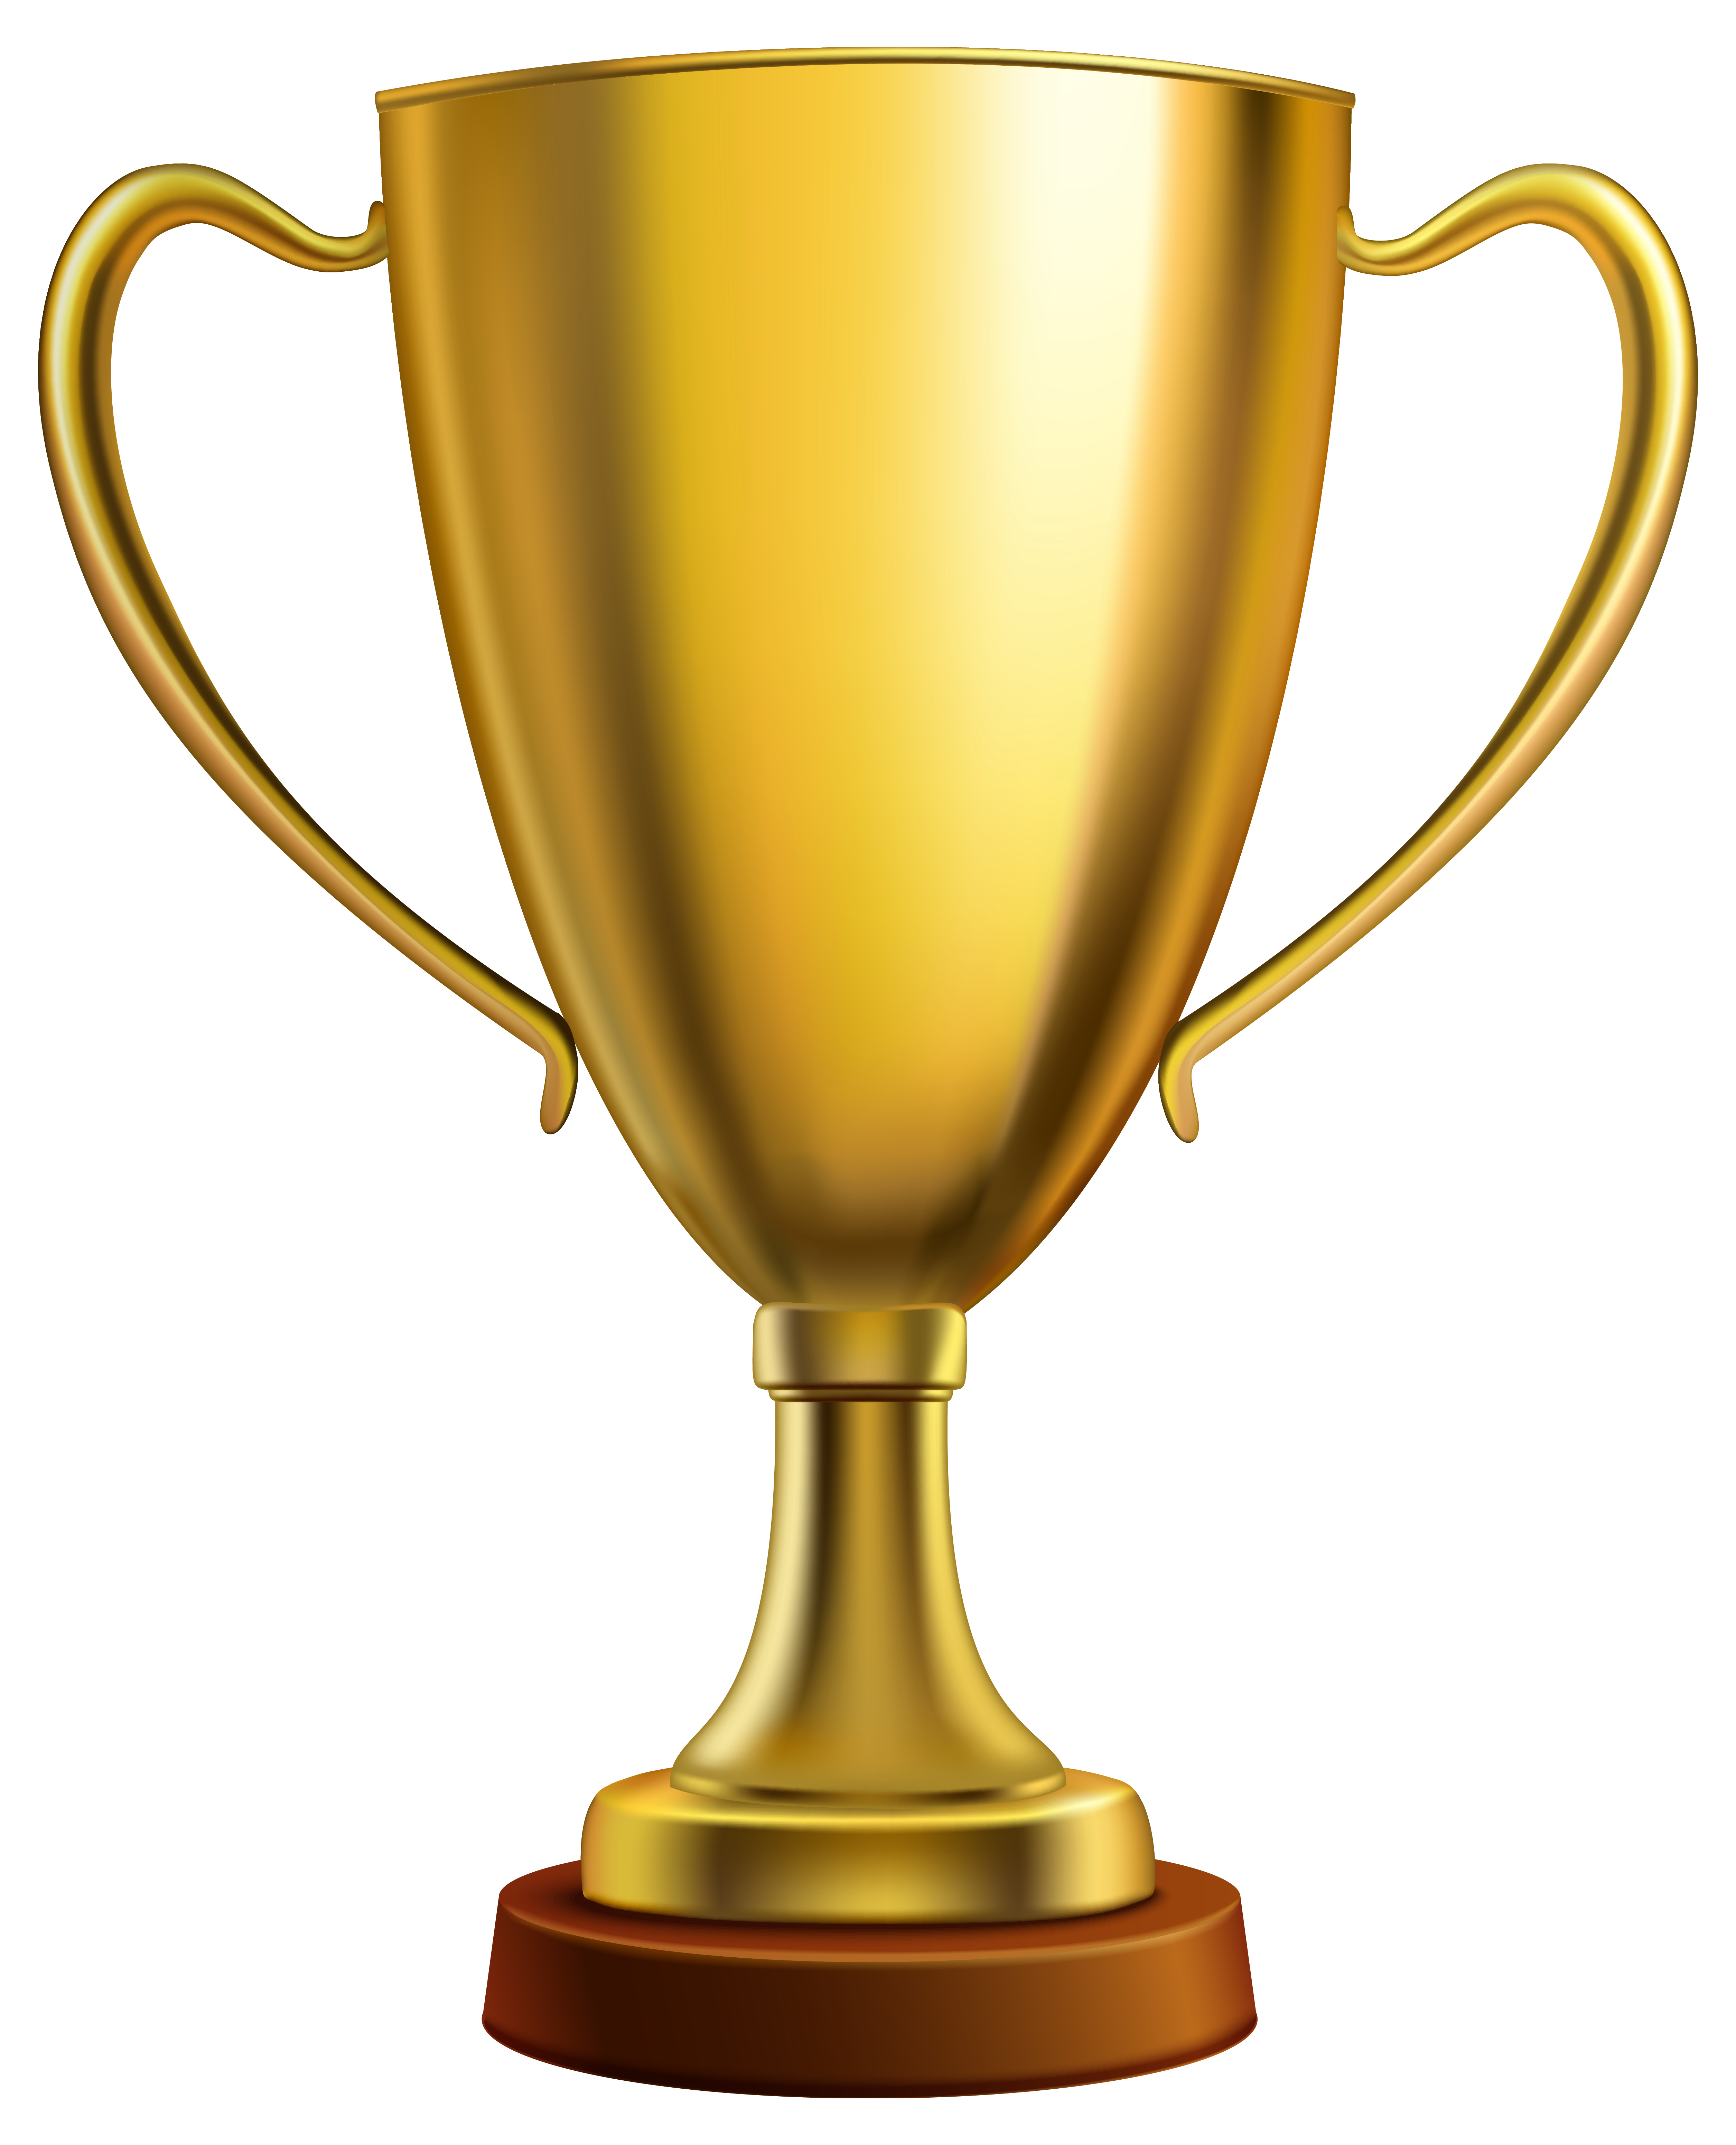 Pink clipart trophy. Gold cup png image